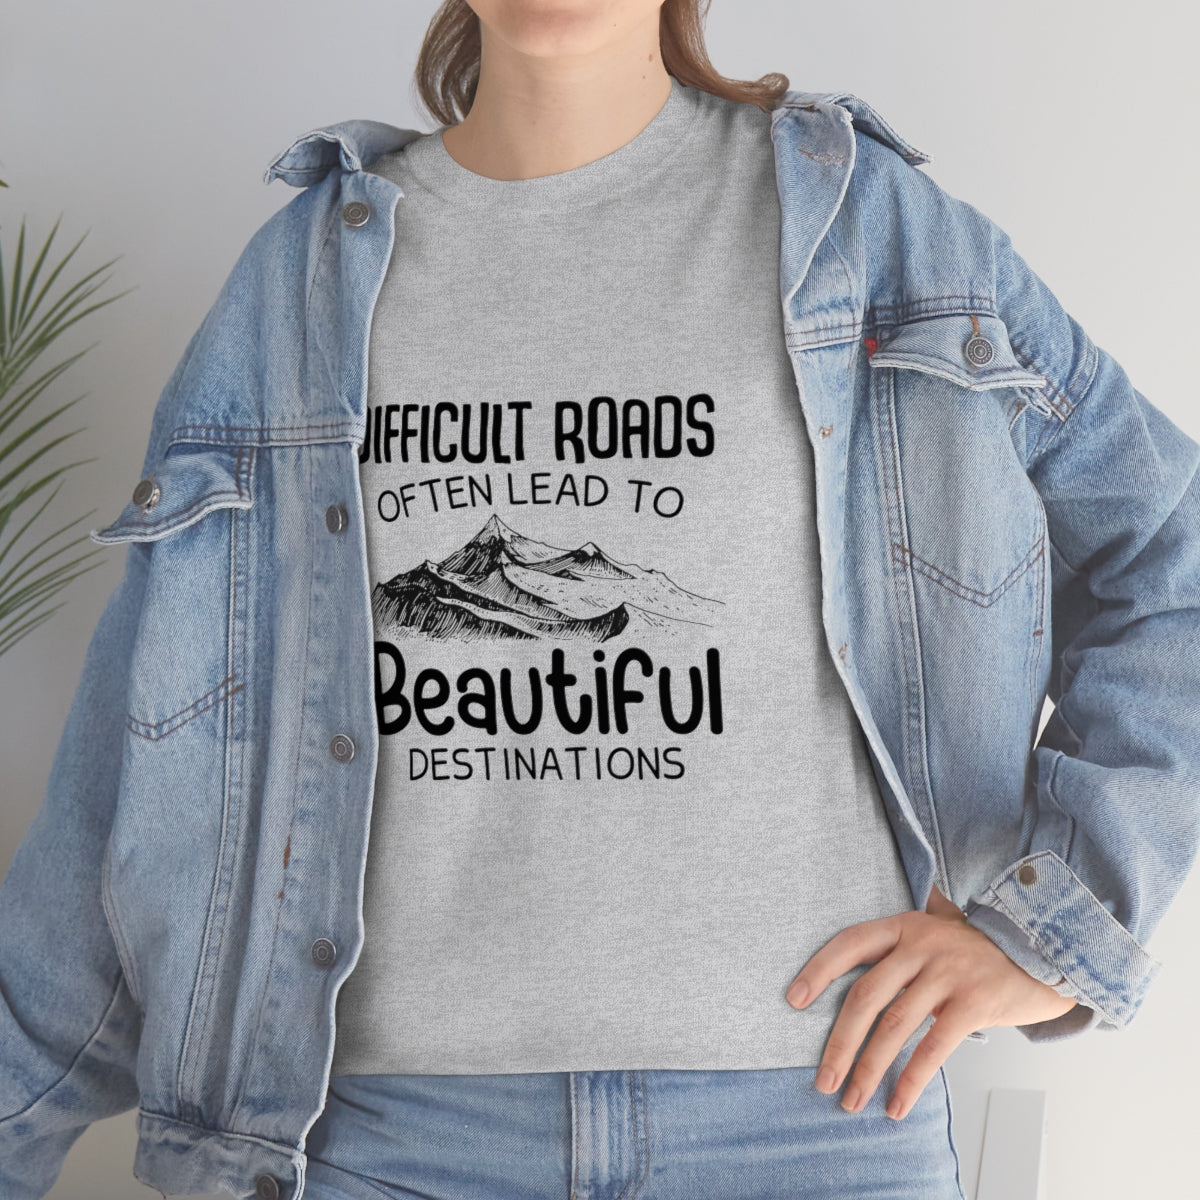 Difficult Road leads to Beautiful destinations Unisex Heavy Cotton Tee